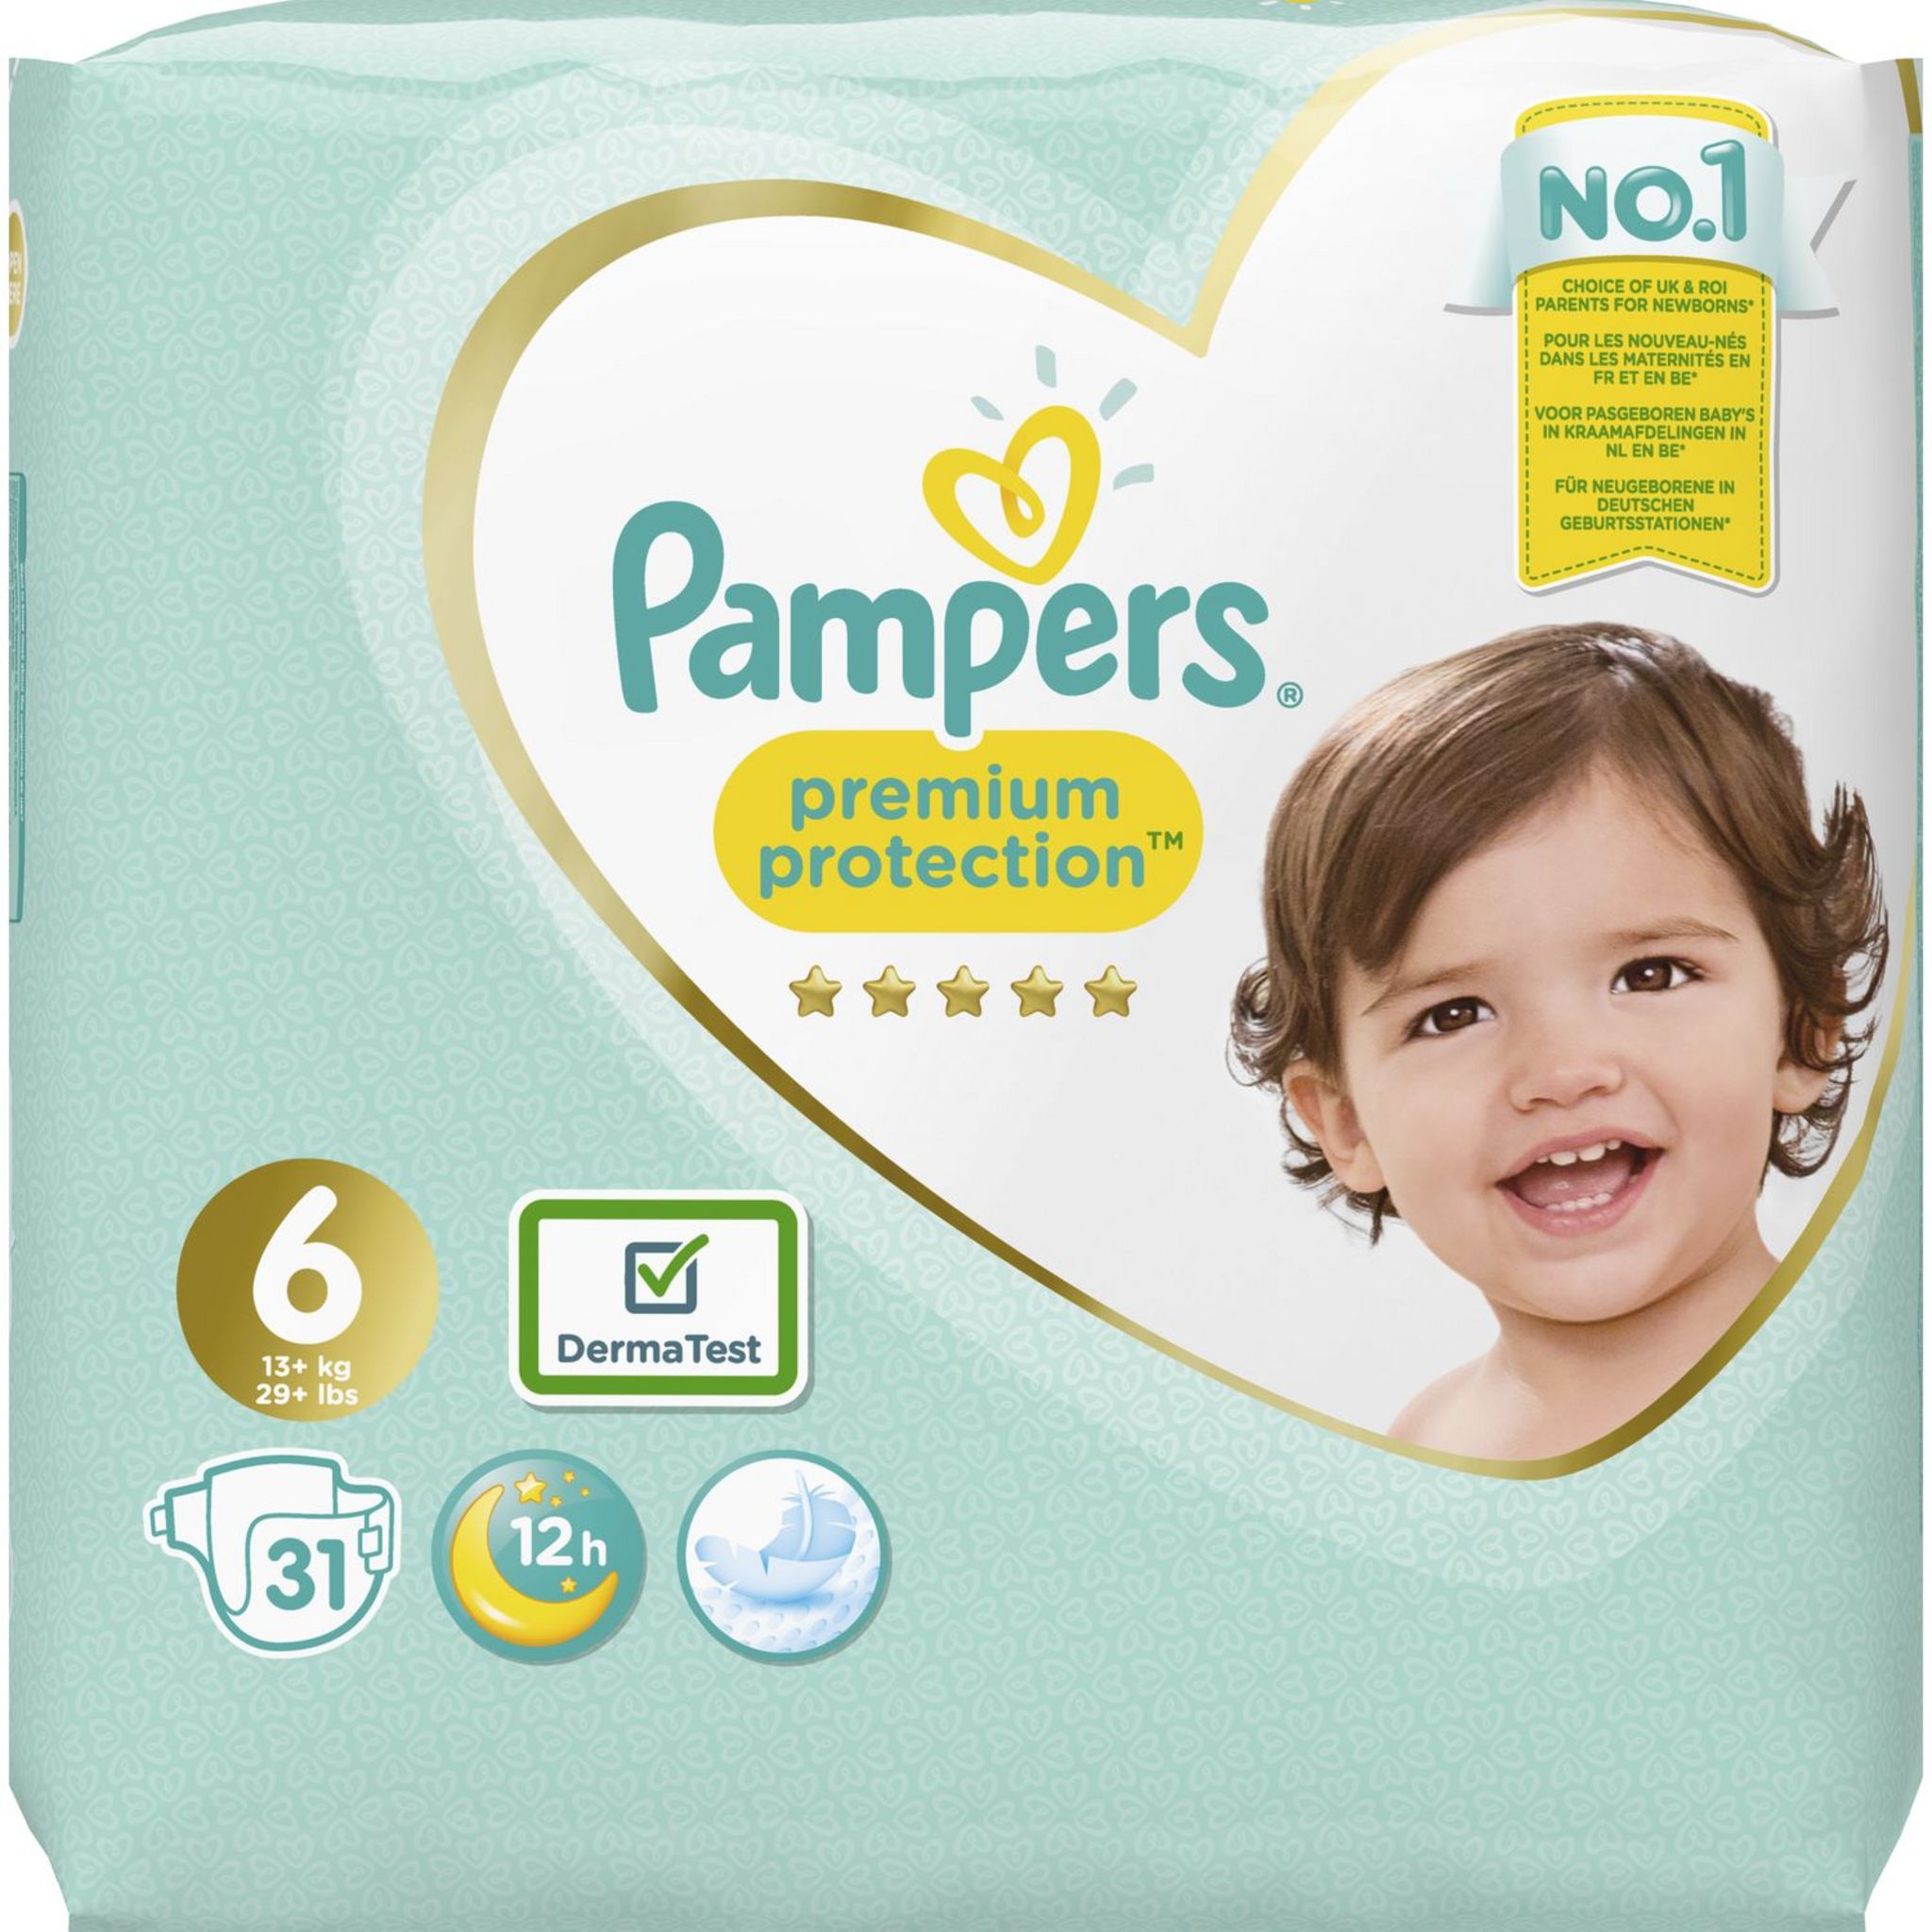 PAMPERS Premium protection géant couches taille 6+ (+13kg) 31 couches pas  cher 